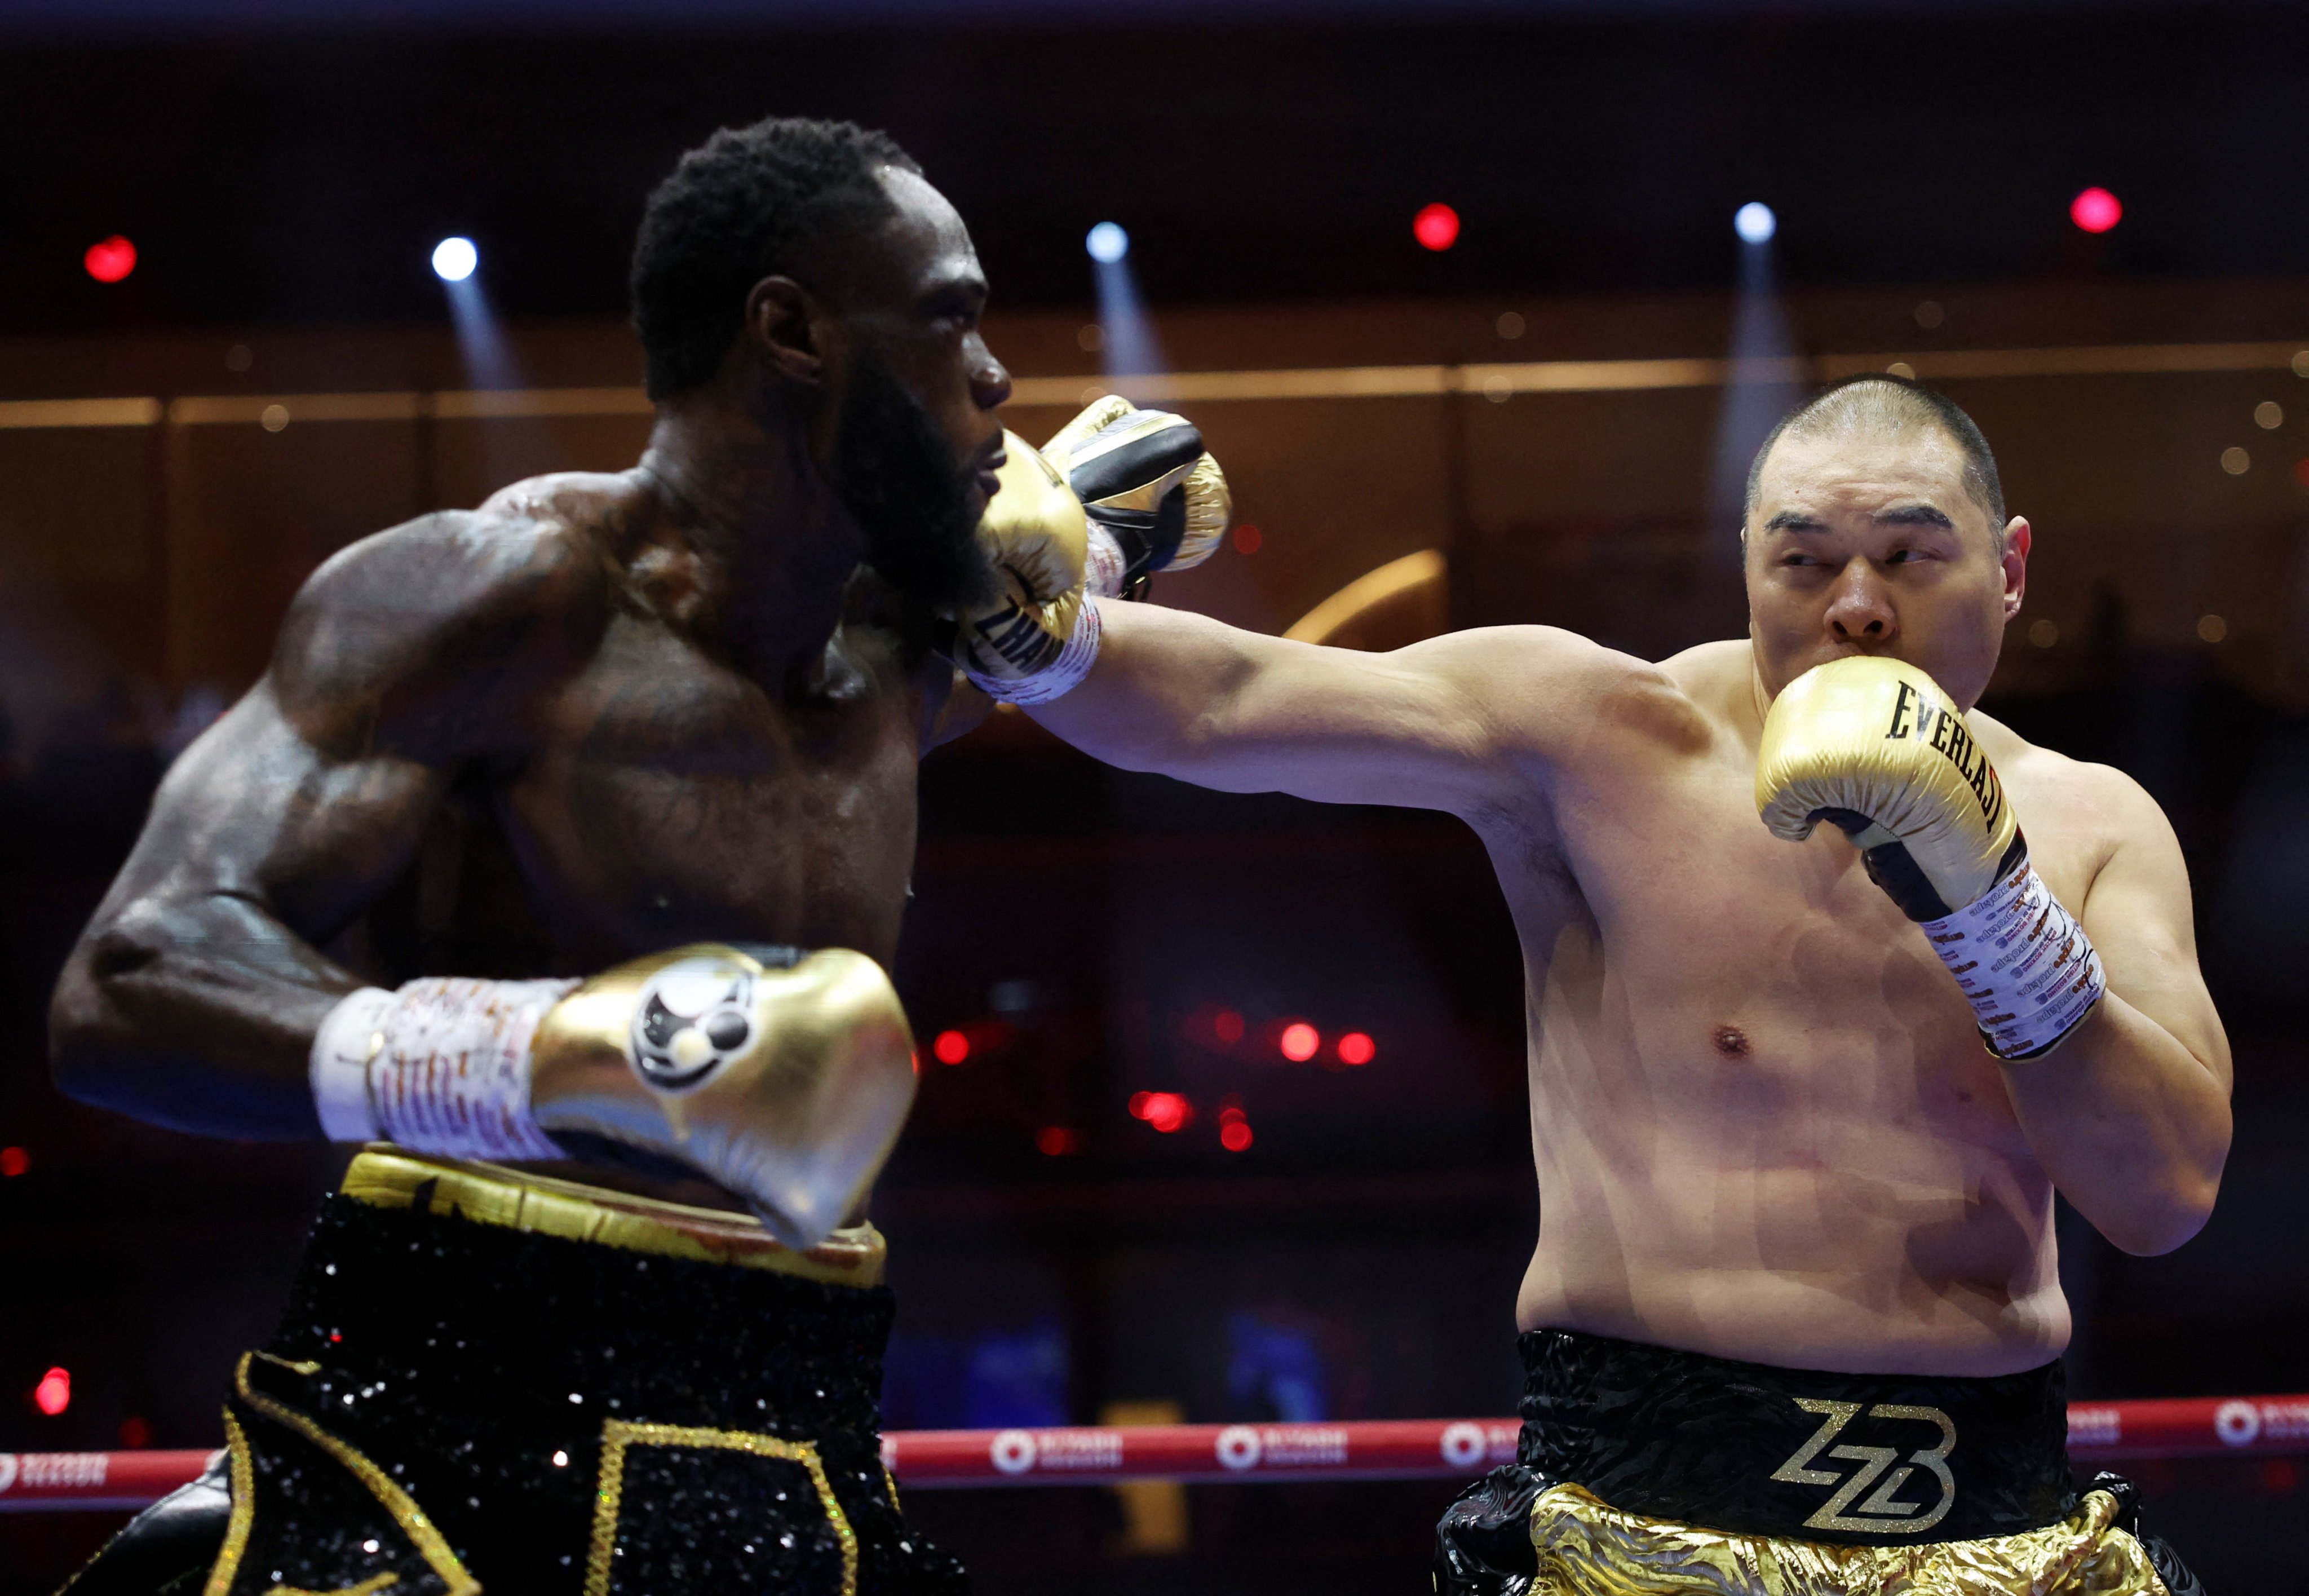 Zhang Zhilei (right) connects with a right during his fight with Deontay Wilder at Kingdom Arena, Riyadh, Saudi Arabia. Photo: Reuters